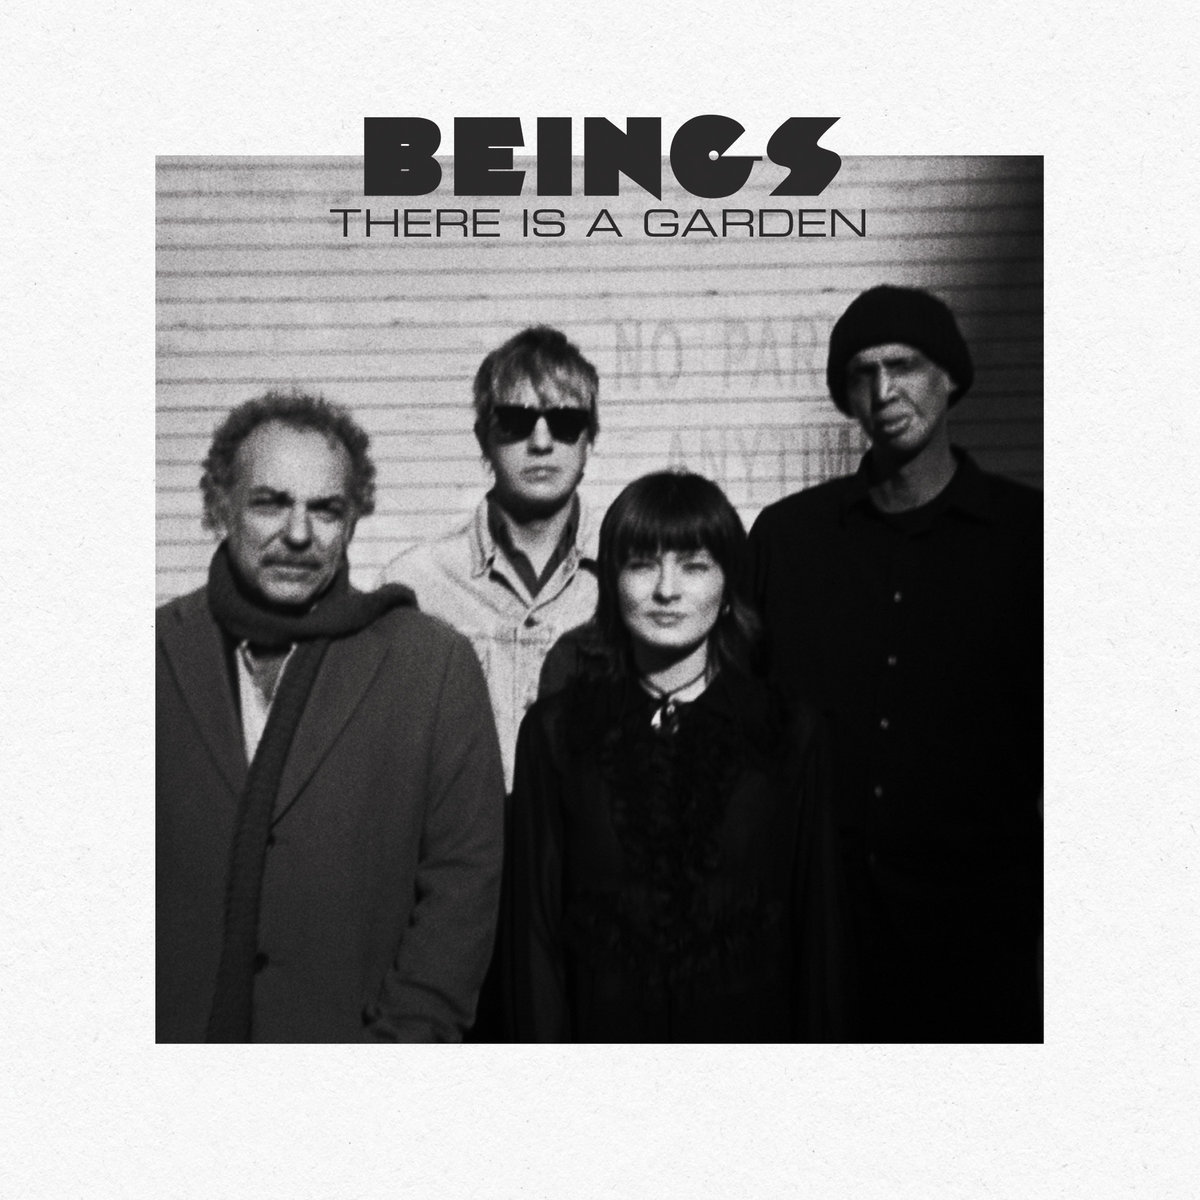 BEINGS - THERE IS A GARDEN - LP